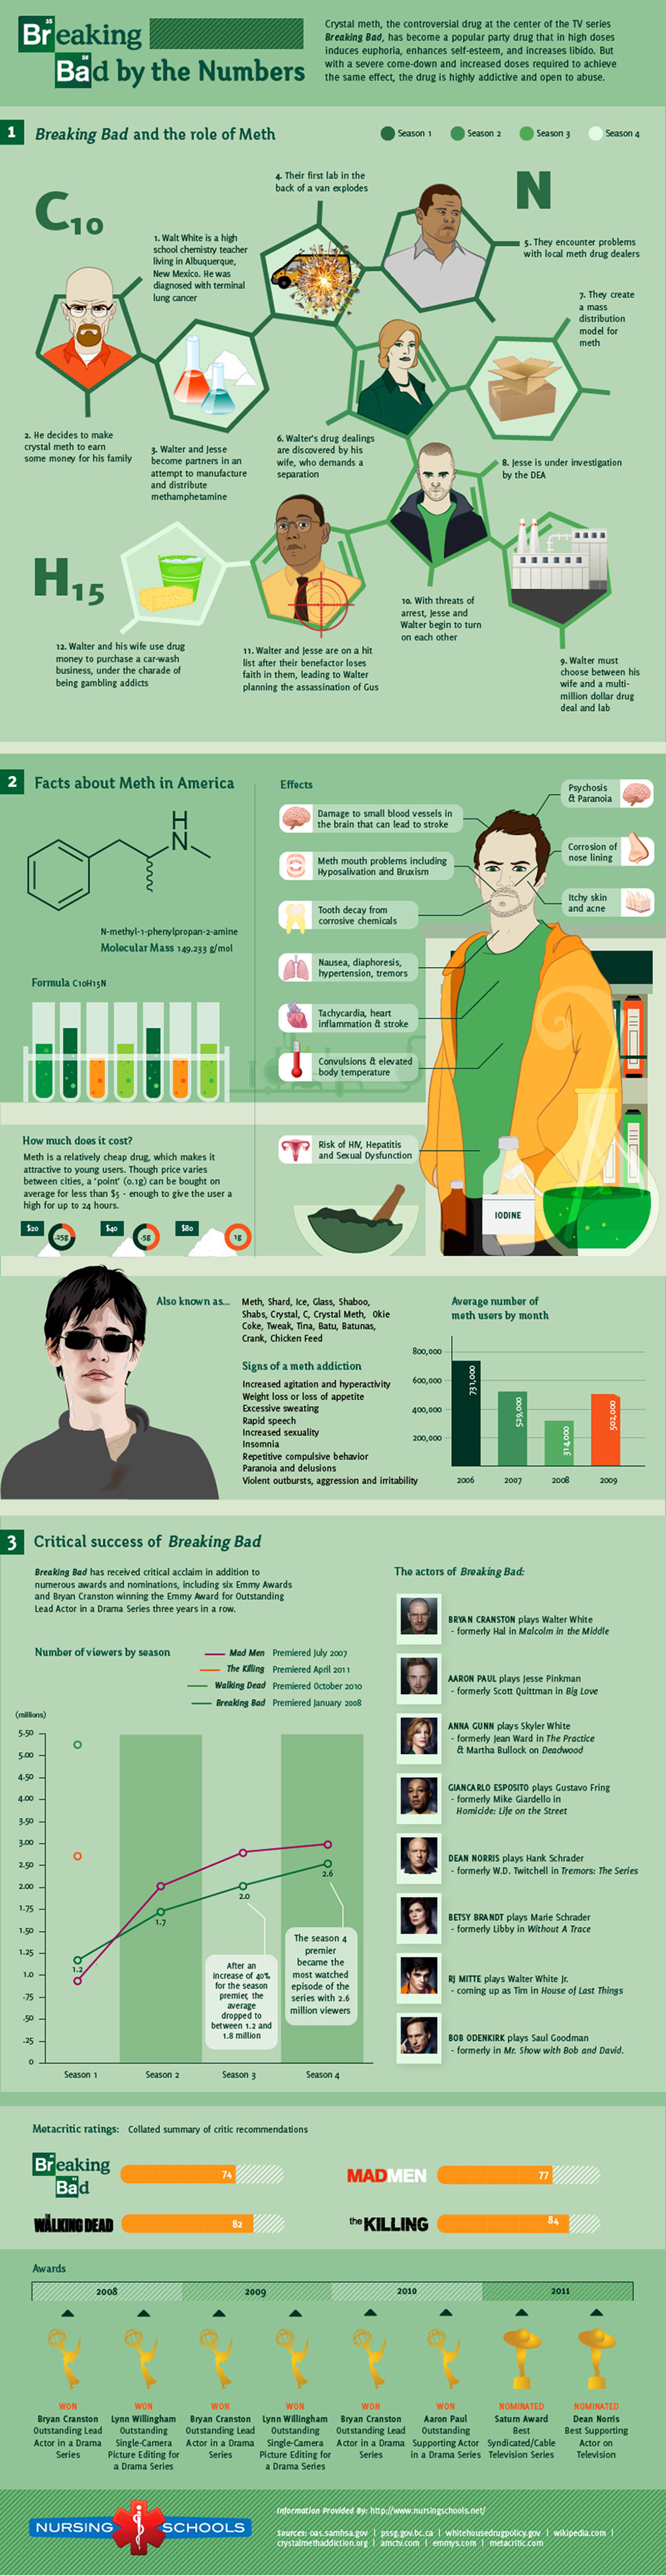 Breaking Bad by the Numbers Infographic